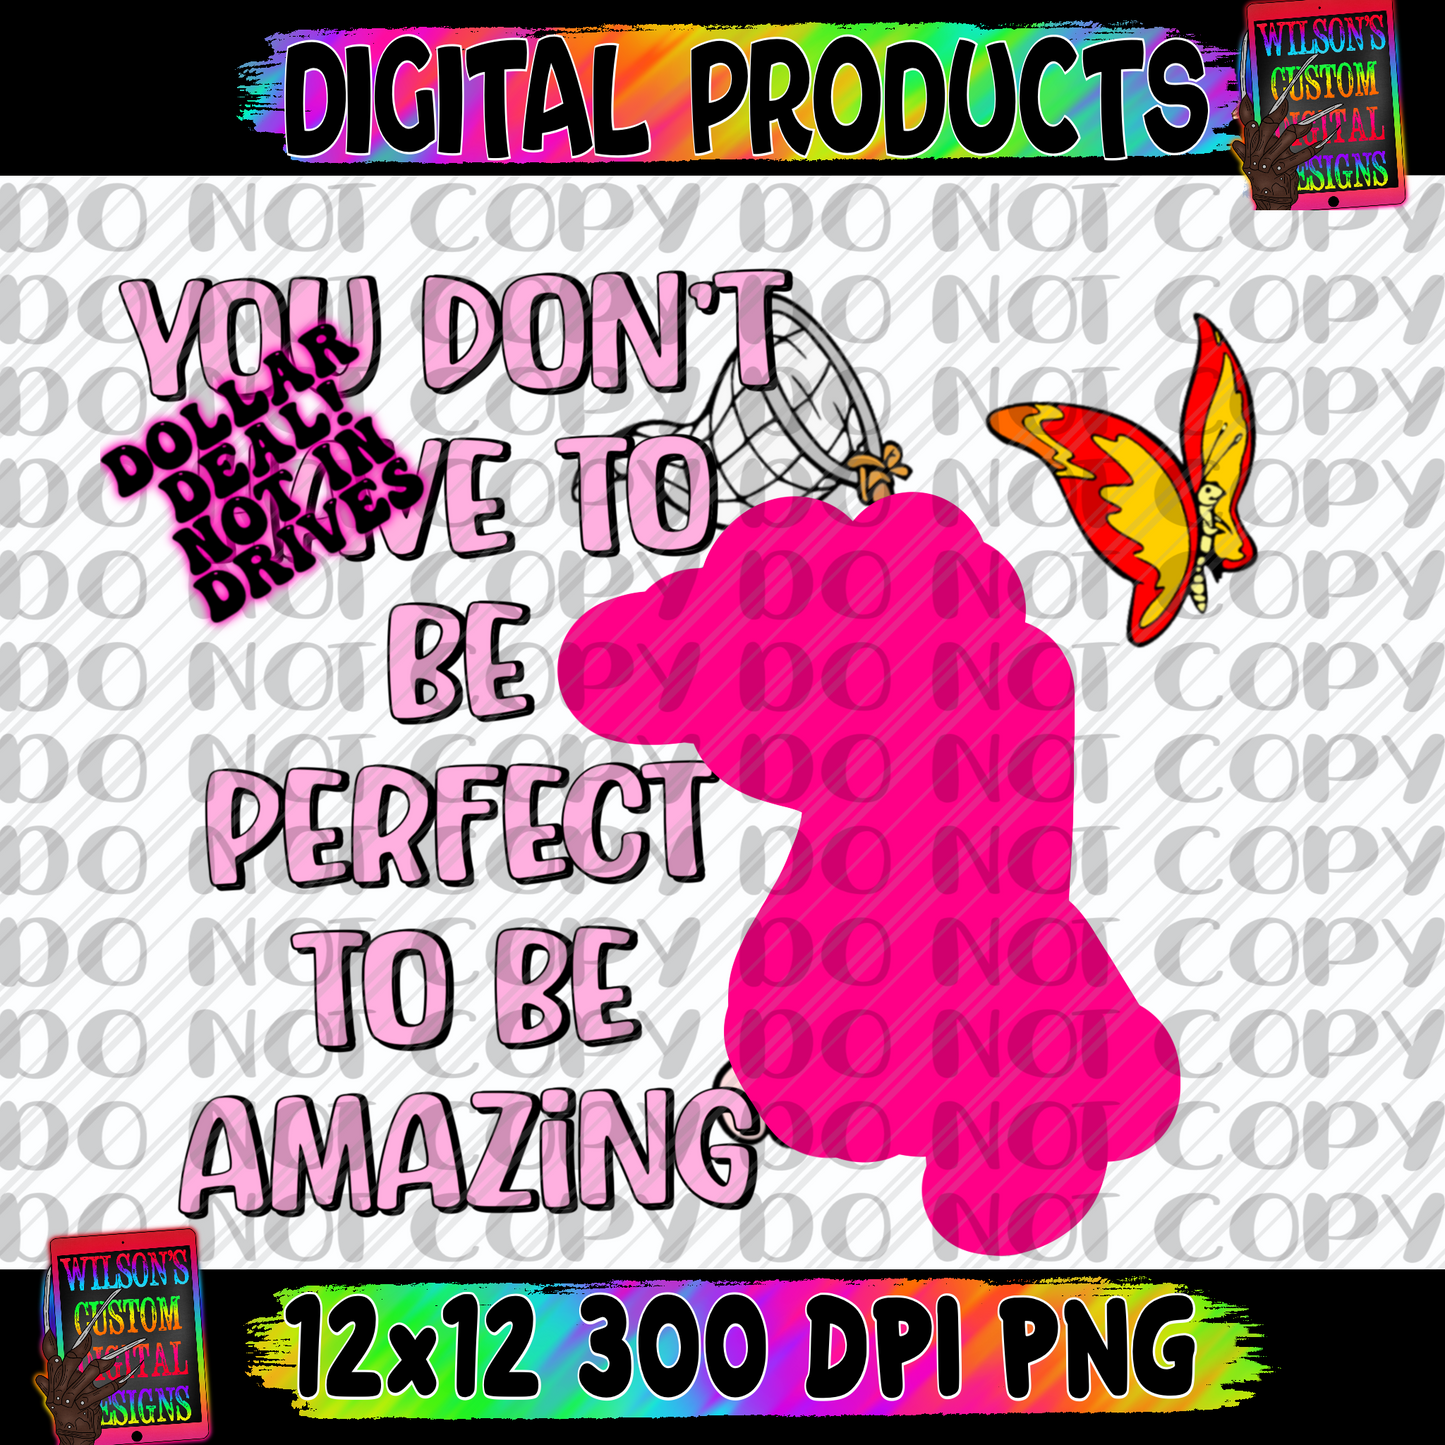 Don’t have to be perfect to be amazing